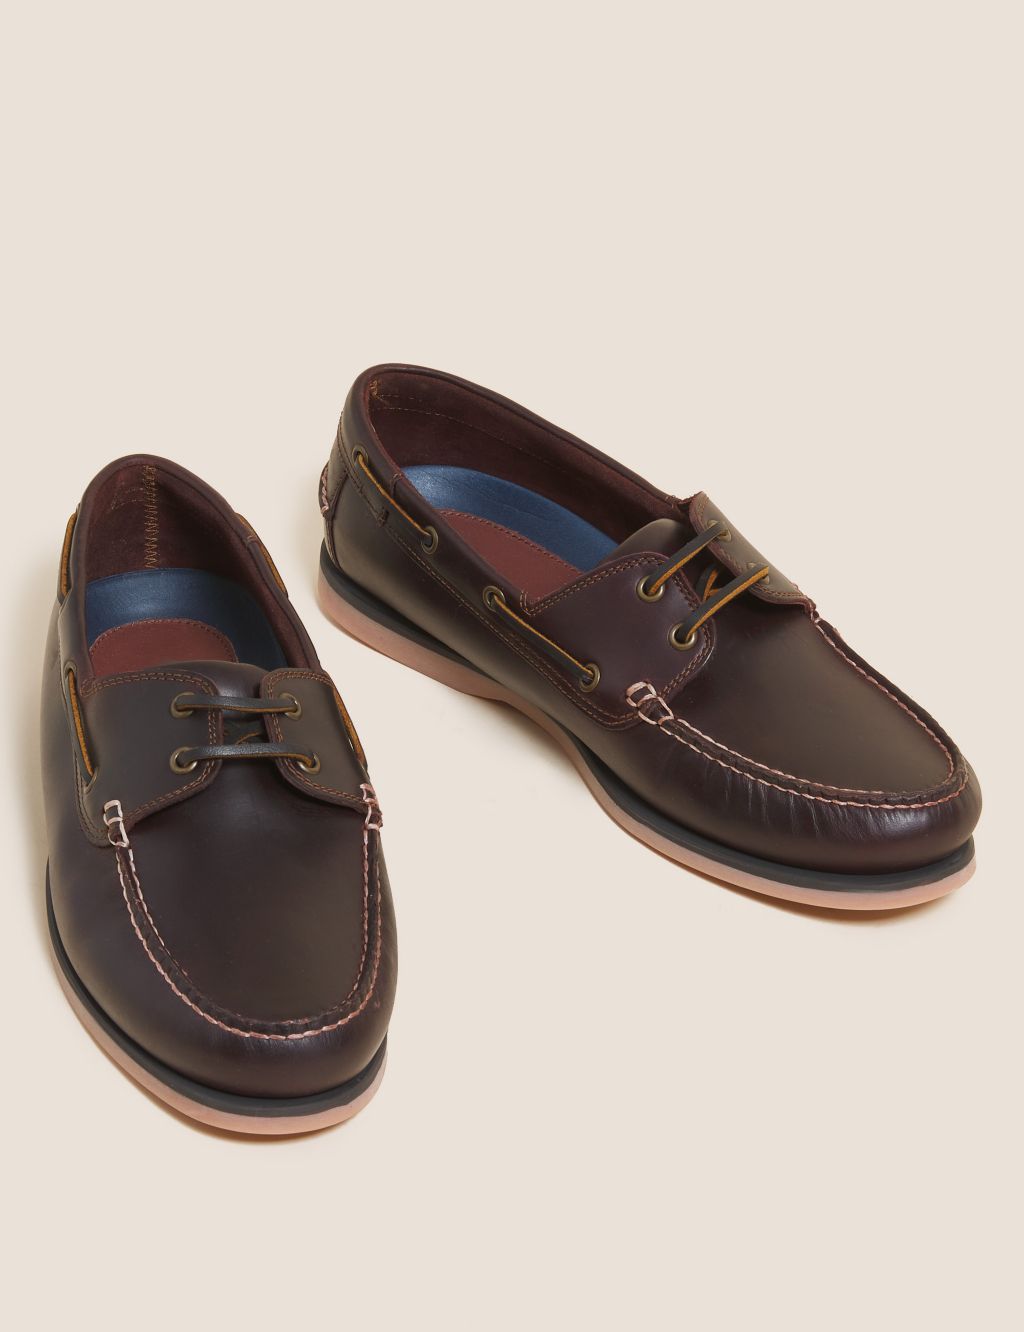 Wide Fit Leather Boat Shoes image 4